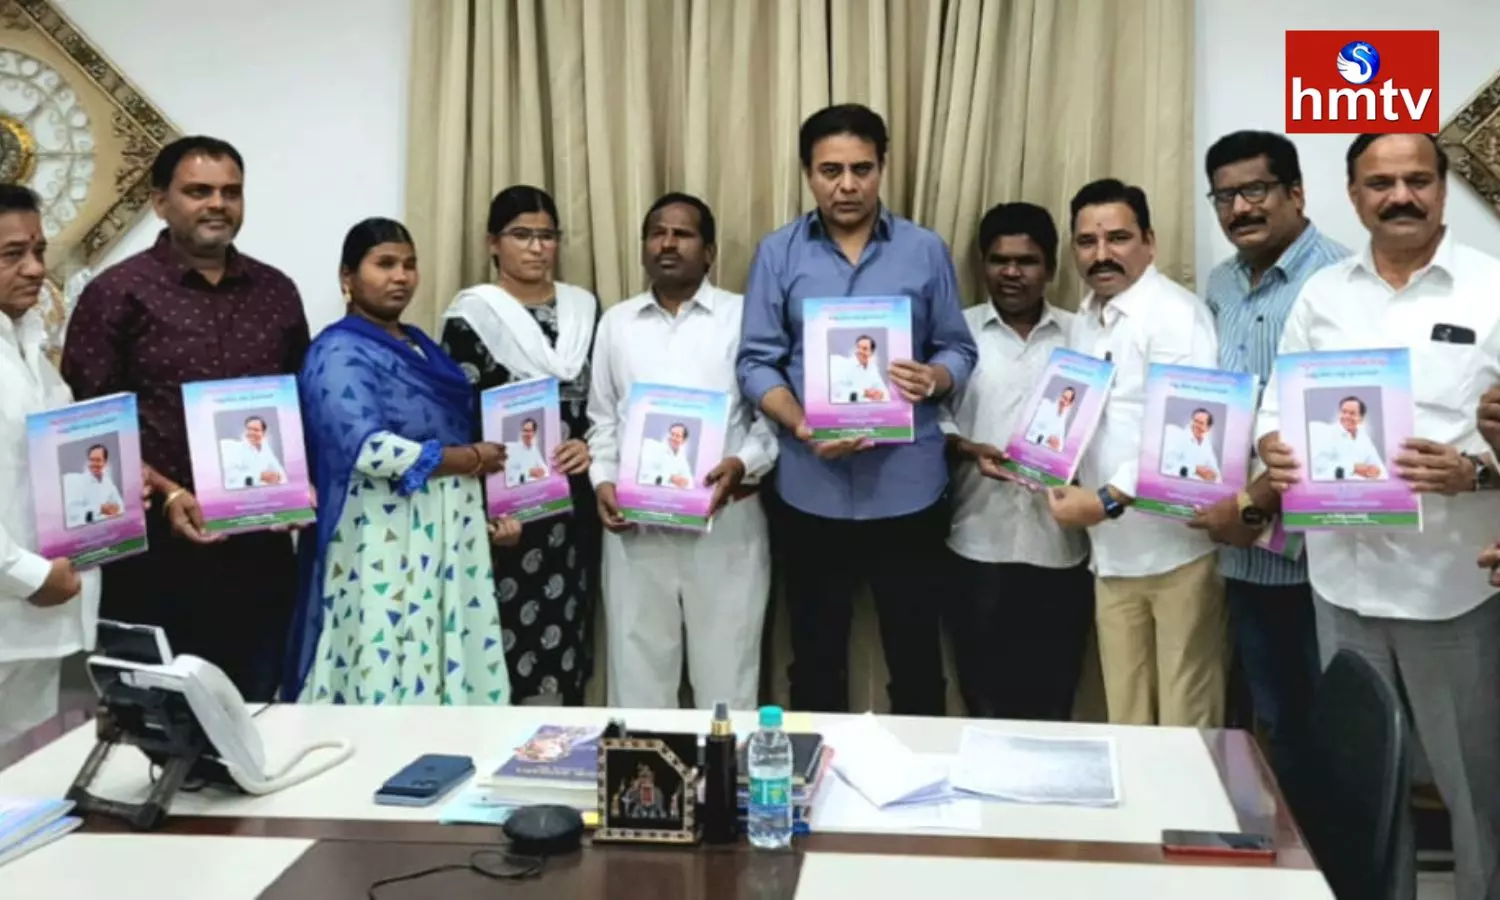 On KCR Biography Occasion Braille Script Book Released